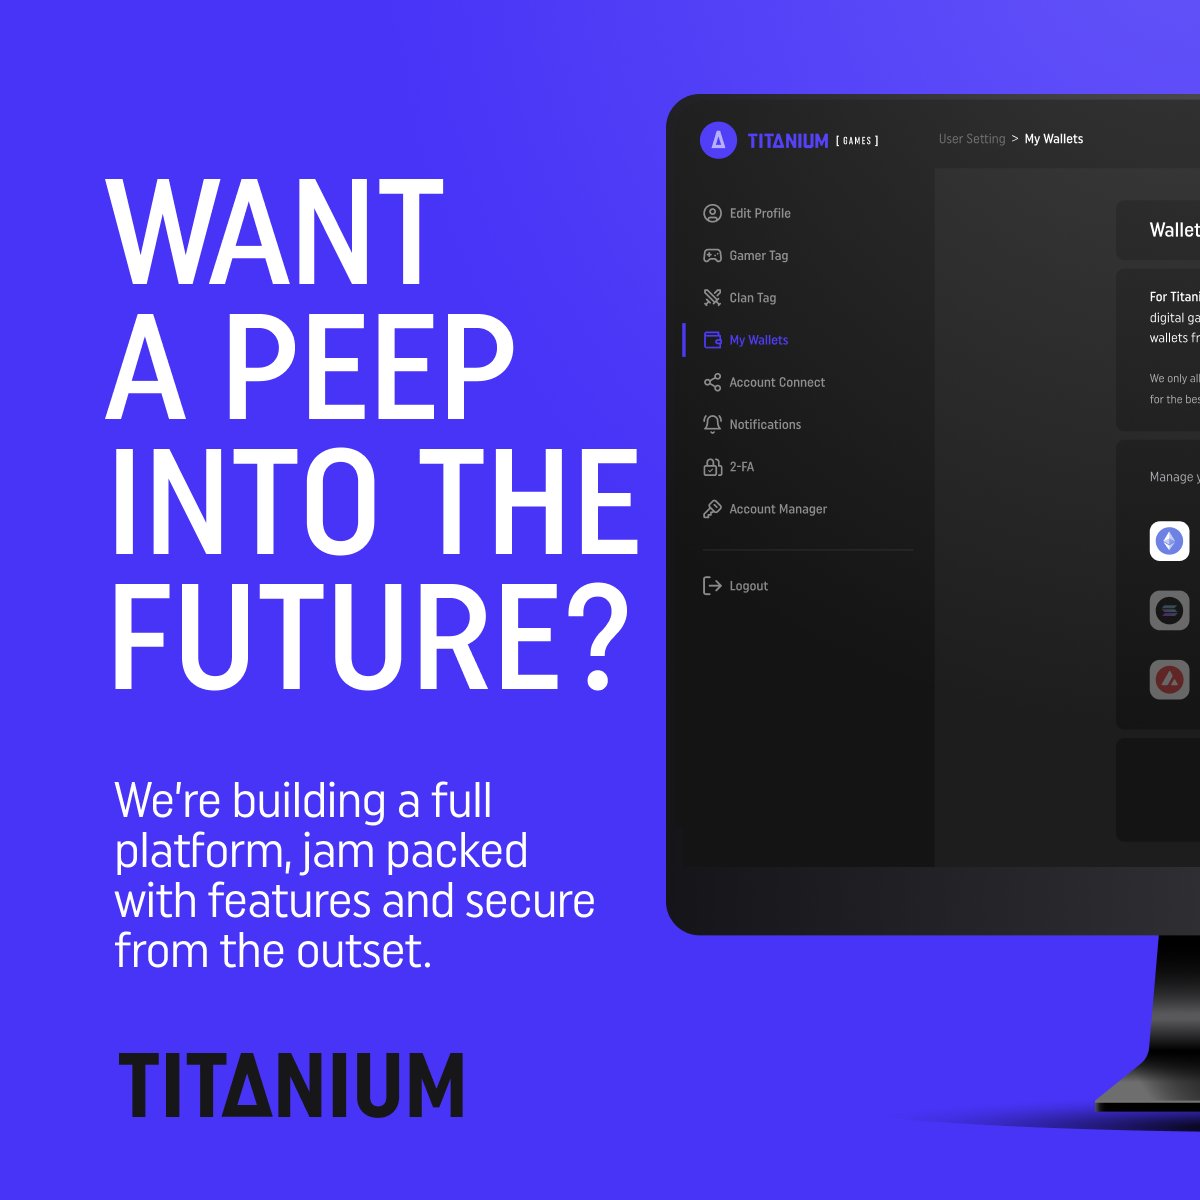 Developer Insight:

Titanium isn't just tech.

It's a refined product. Unique gamertags, clan support for #NFTCommunities with weekly prizes, and multi-chain support—all wrapped in a seamless gas free gaming experience. 

It's the future of gaming.

#Titanium22 | $Ti